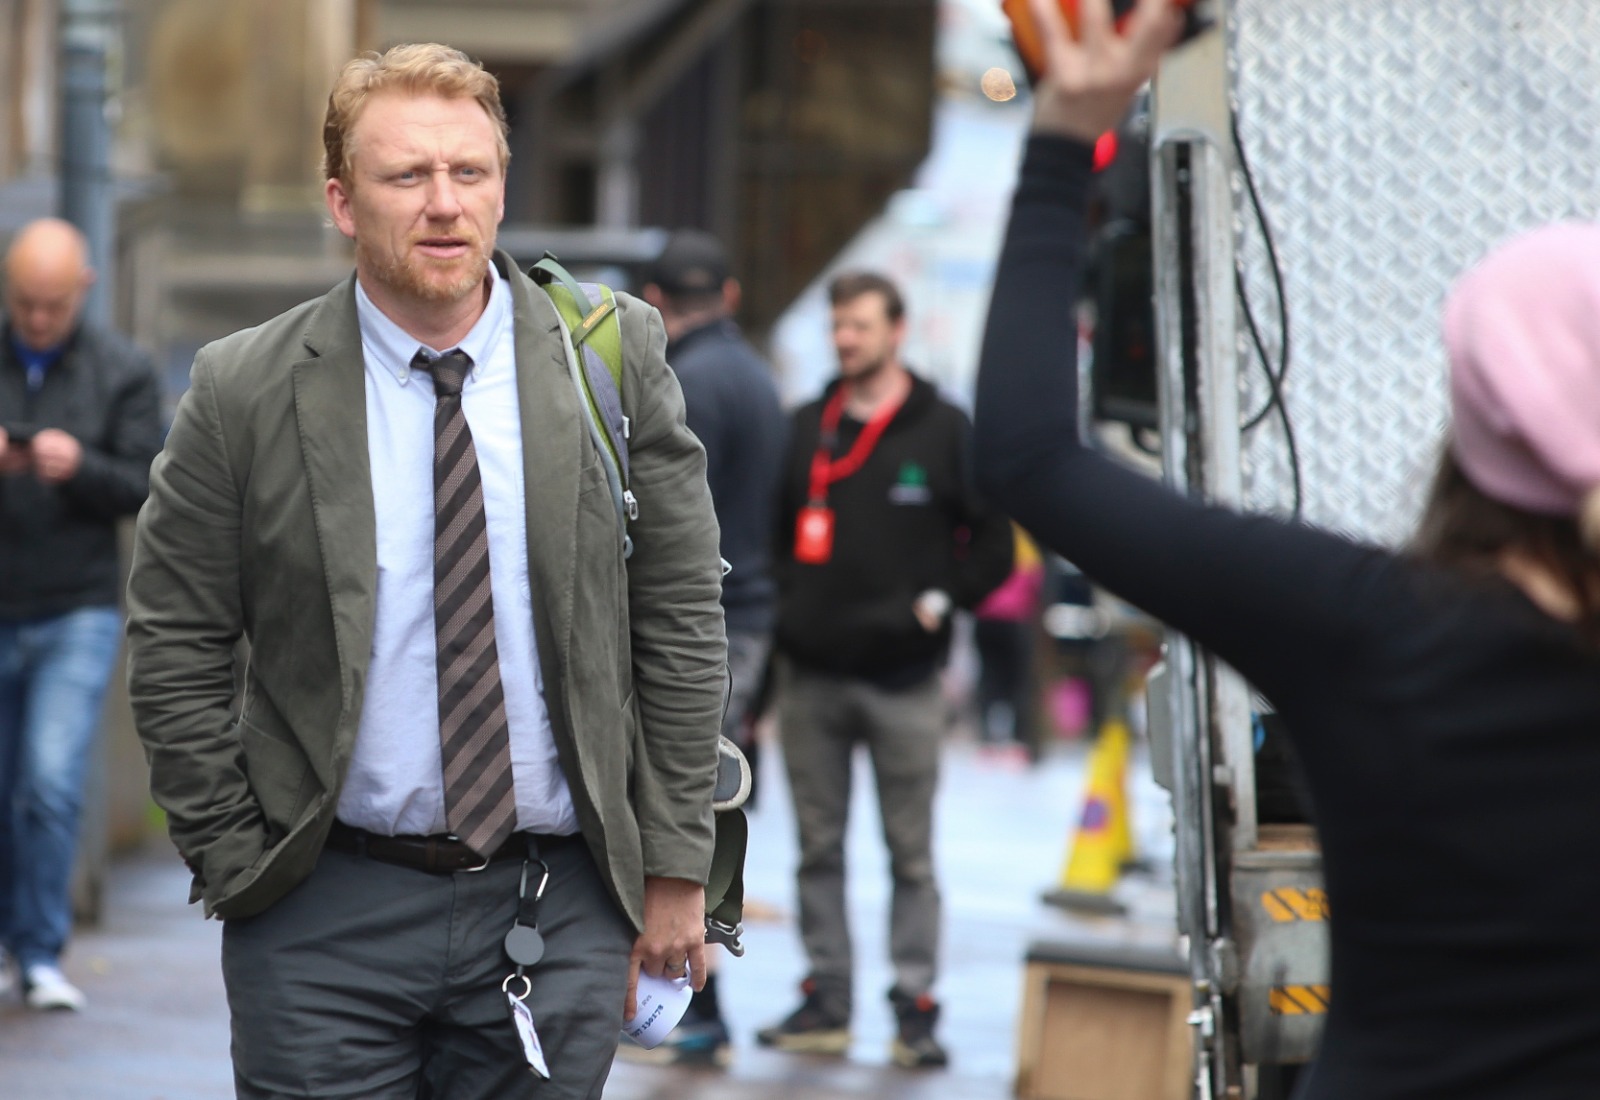 Actor Kevin McKidd spotted in Glasgow city centre filming new ITV drama The Elect